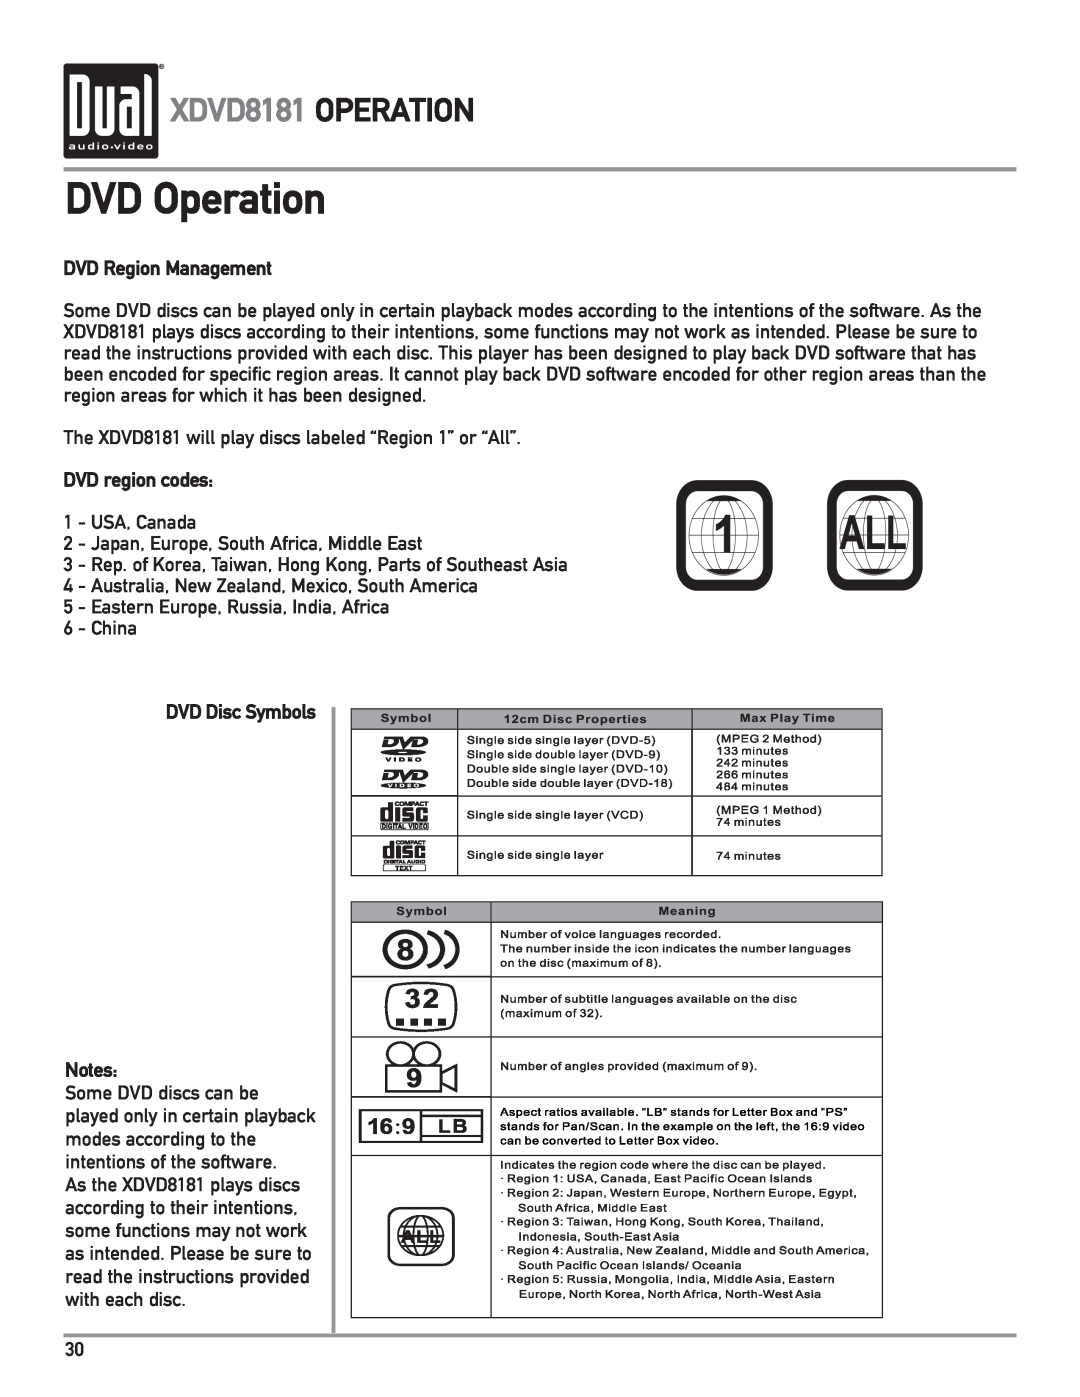 Dual owner manual DVD Operation, XDVD8181 OPERATION, DVD Region Management, DVD region codes, DVD Disc Symbols Notes 